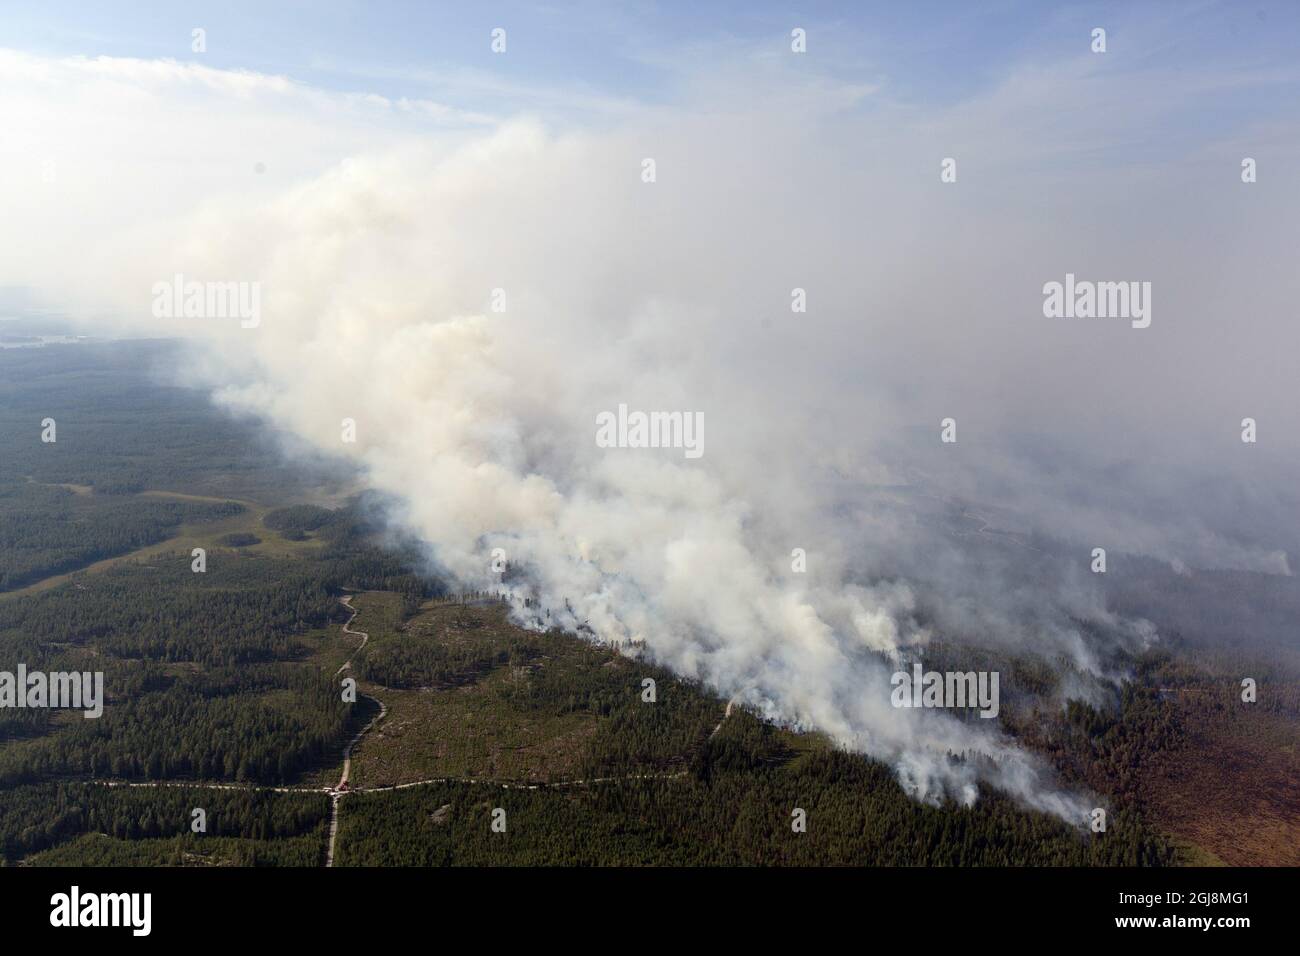 RÃƒÂ–RBO 20140803 FILE - Smoke billow as the wildfire front nears the village of Rorbo near Sala, Central Sweden, on this August 3, 2014 file photo. The fire, covering thousands of hectares, is in its sixth day and firefighters believe it will burn for weeks or even months. It is classified as the worst forest fire in Sweden's modern history. Foto: Jocke Berglund / TT kod:200  Stock Photo